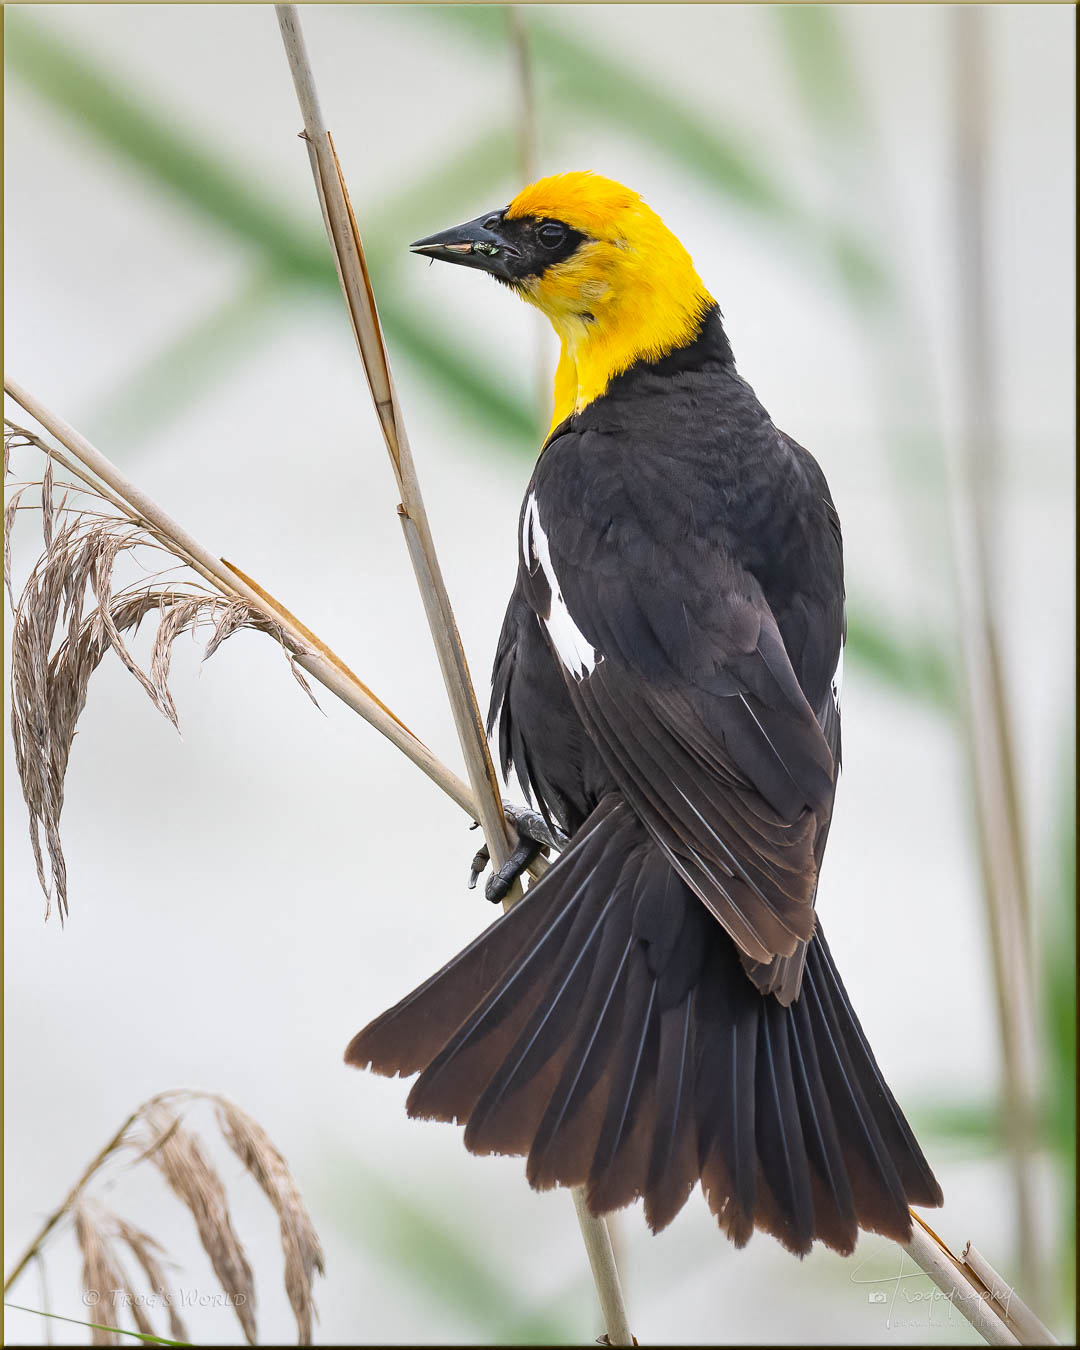 Yellow-headed Blackbird perched on reeds